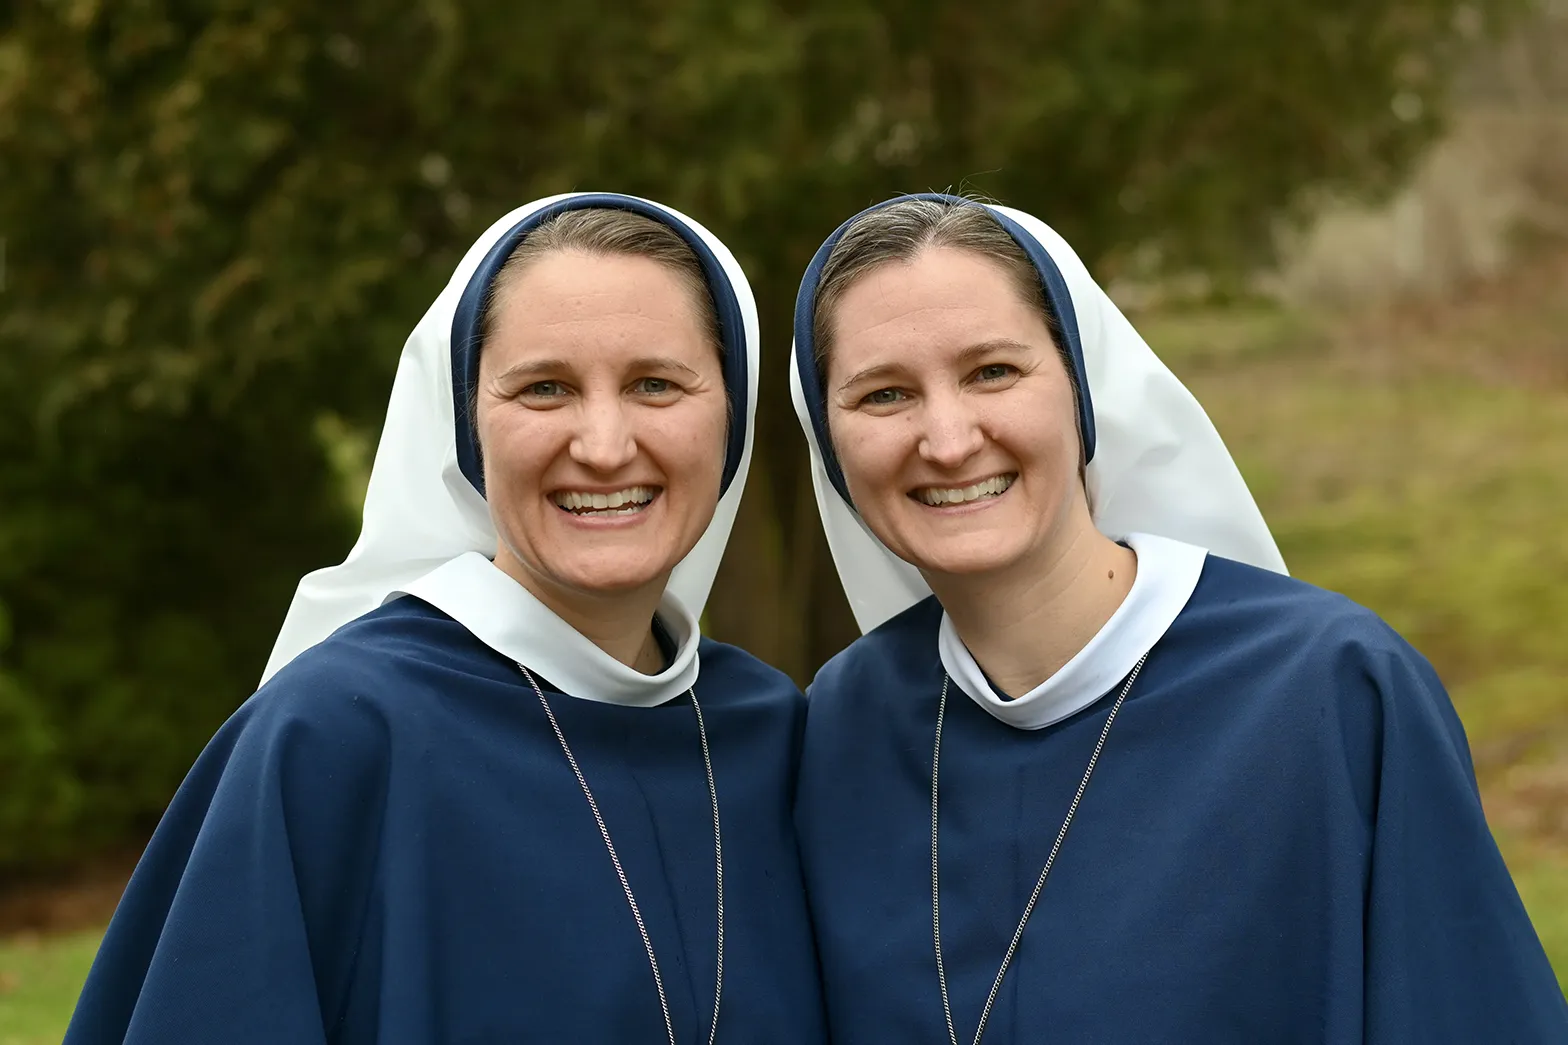 Sister Pia Jude (left) and Sister Luca Benedict (right), twin sisters and Sisters of Life.?w=200&h=150